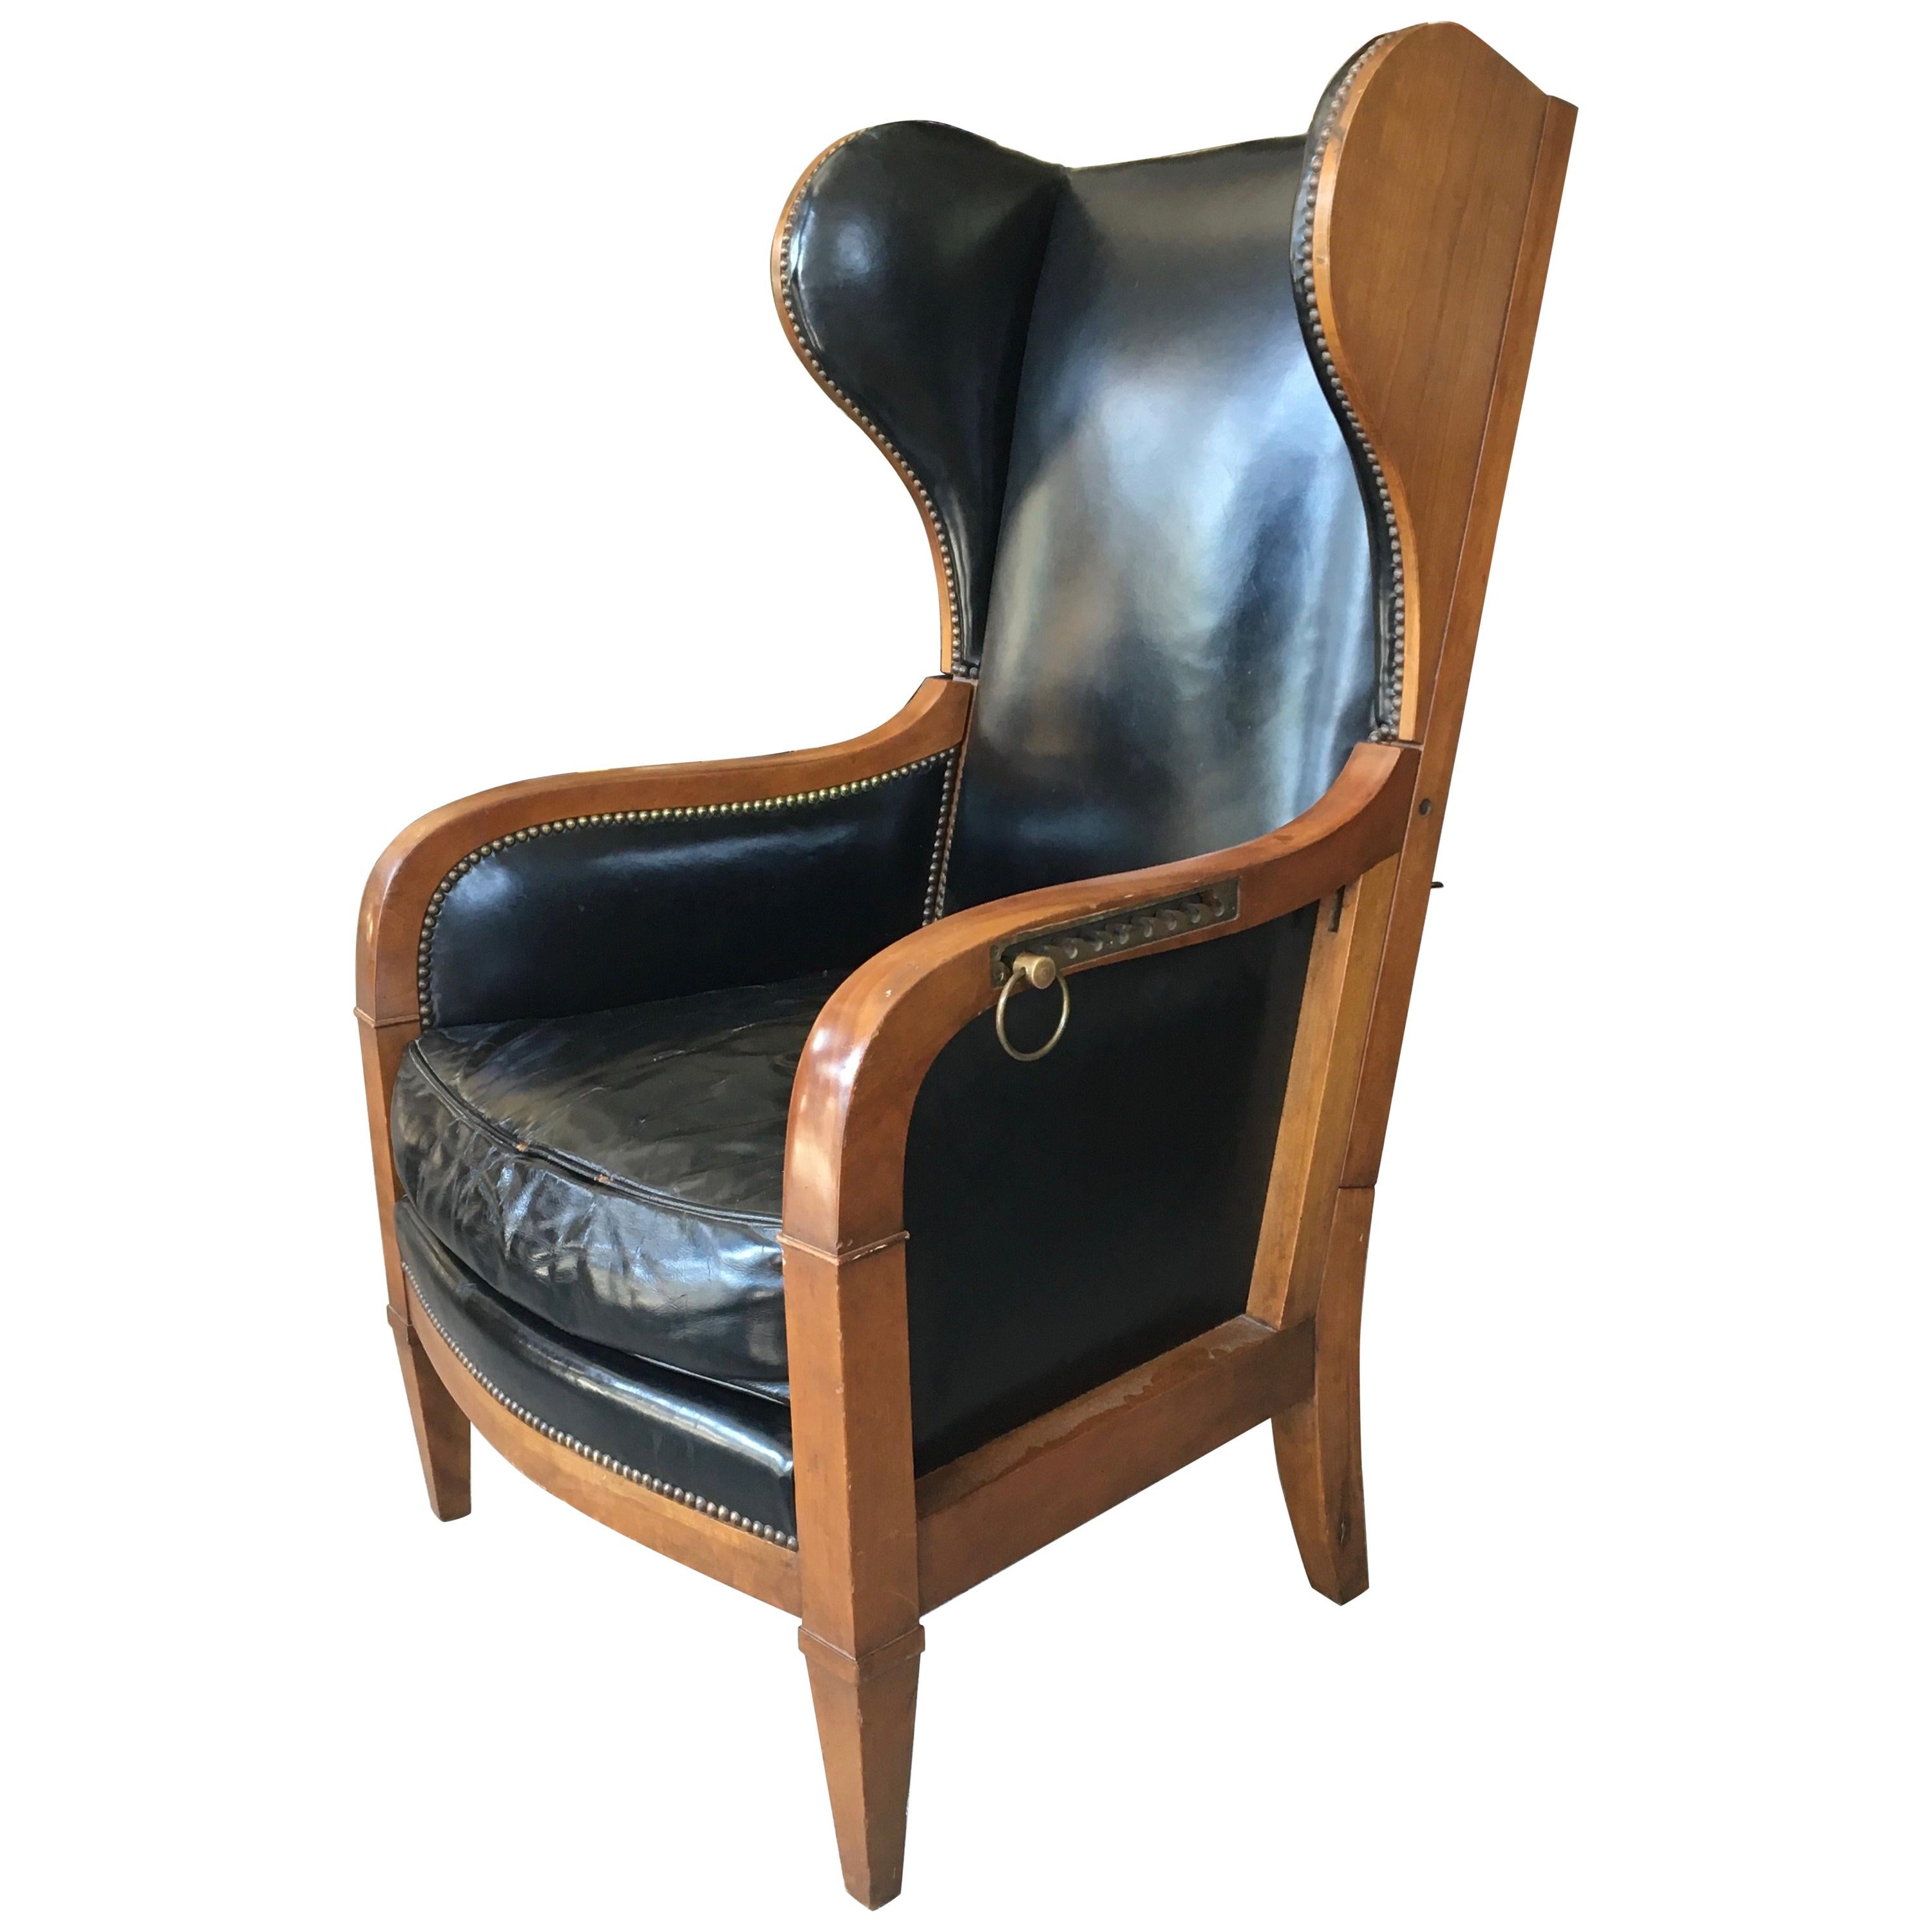 French Art Deco Recliner Wing Chair by Baker Furniture, Walnut with Brass Detail